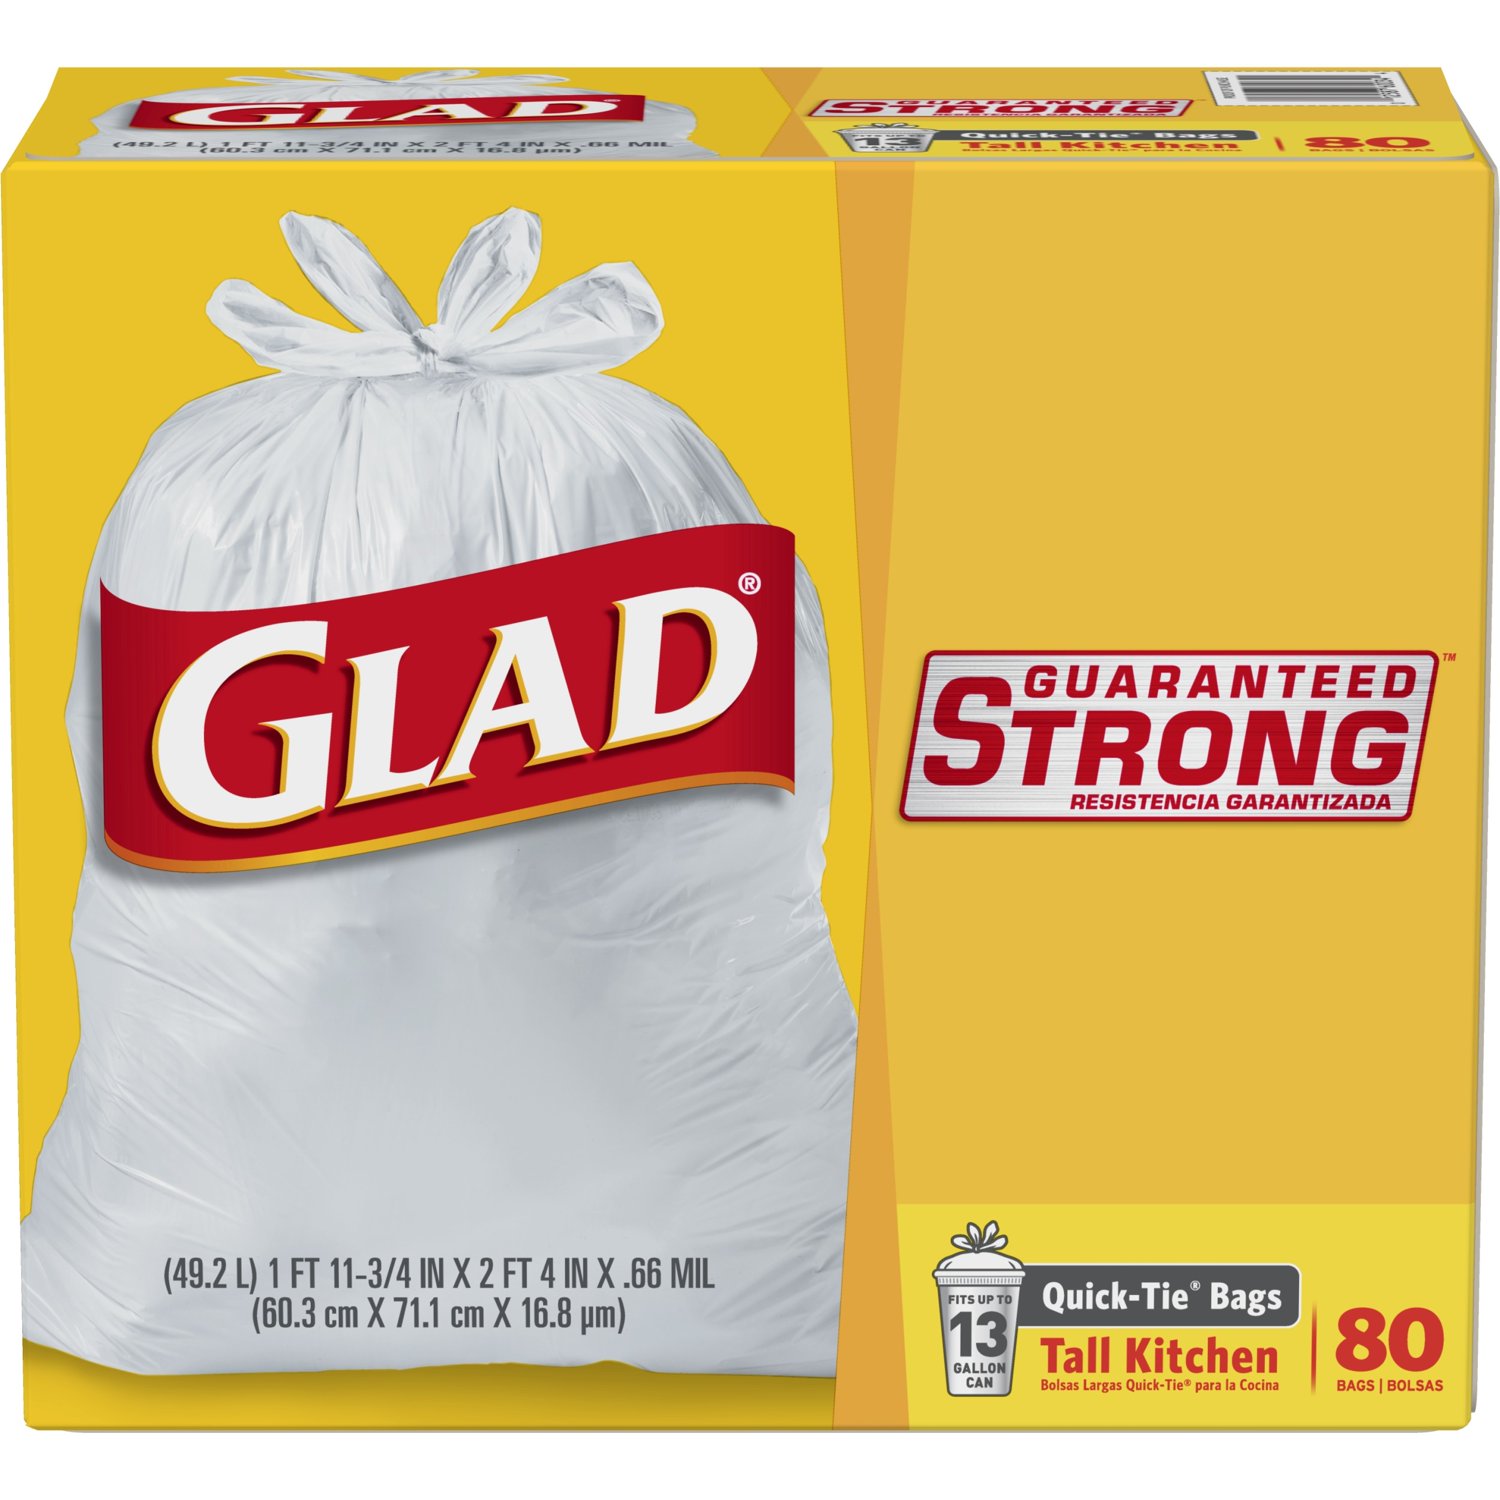 Glad Quick Tie 13 Gallon Tall Kitchen Trash Bags, 80 Bags - image 1 of 7